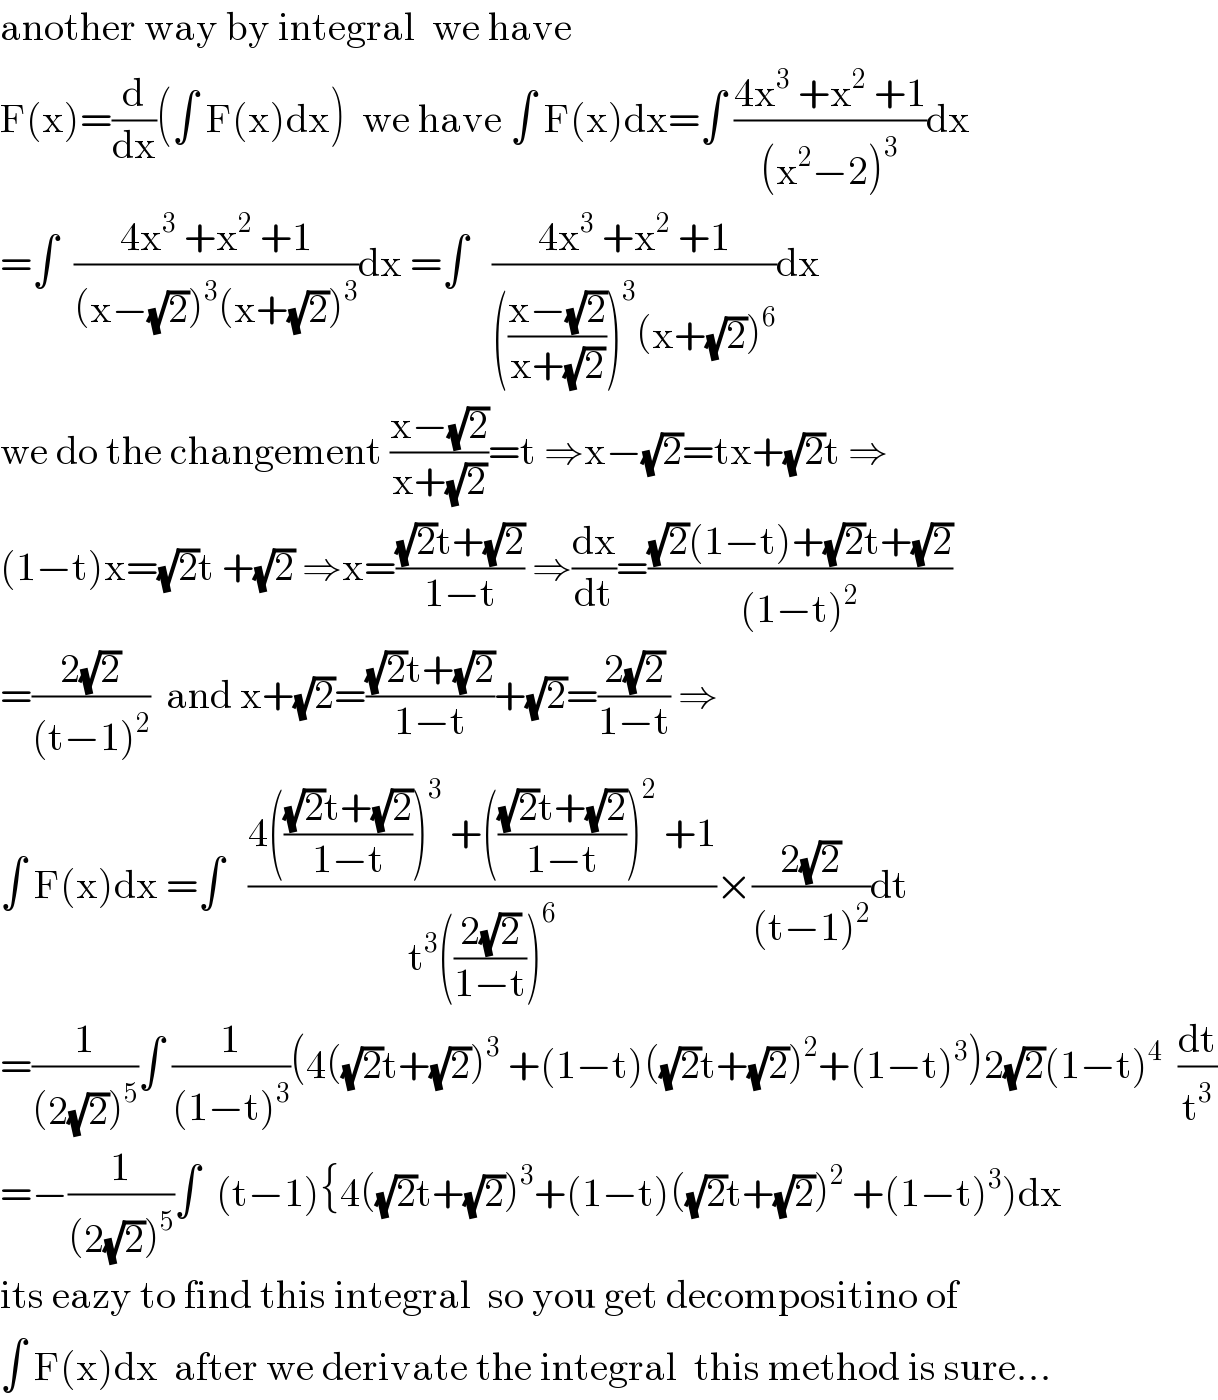 another way by integral  we have  F(x)=(d/dx)(∫ F(x)dx)  we have ∫ F(x)dx=∫ ((4x^3  +x^2  +1)/((x^2 −2)^3 ))dx  =∫  ((4x^3  +x^2  +1)/((x−(√2))^3 (x+(√2))^3 ))dx =∫   ((4x^3  +x^2  +1)/((((x−(√2))/(x+(√2))))^3 (x+(√2))^6 ))dx  we do the changement ((x−(√2))/(x+(√2)))=t ⇒x−(√2)=tx+(√2)t ⇒  (1−t)x=(√2)t +(√2) ⇒x=(((√2)t+(√2))/(1−t)) ⇒(dx/dt)=(((√2)(1−t)+(√2)t+(√2))/((1−t)^2 ))  =((2(√2))/((t−1)^2 ))  and x+(√2)=(((√2)t+(√2))/(1−t))+(√2)=((2(√2))/(1−t)) ⇒  ∫ F(x)dx =∫   ((4((((√2)t+(√2))/(1−t)))^3  +((((√2)t+(√2))/(1−t)))^2  +1)/(t^3 (((2(√2))/(1−t)))^6 ))×((2(√2))/((t−1)^2 ))dt  =(1/((2(√2))^5 ))∫ (1/((1−t)^3 ))(4((√2)t+(√2))^3  +(1−t)((√2)t+(√2))^2 +(1−t)^3 )2(√2)(1−t)^4   (dt/t^3 )  =−(1/((2(√2))^5 ))∫  (t−1){4((√2)t+(√2))^3 +(1−t)((√2)t+(√2))^2  +(1−t)^3 )dx  its eazy to find this integral  so you get decompositino of  ∫ F(x)dx  after we derivate the integral  this method is sure...  